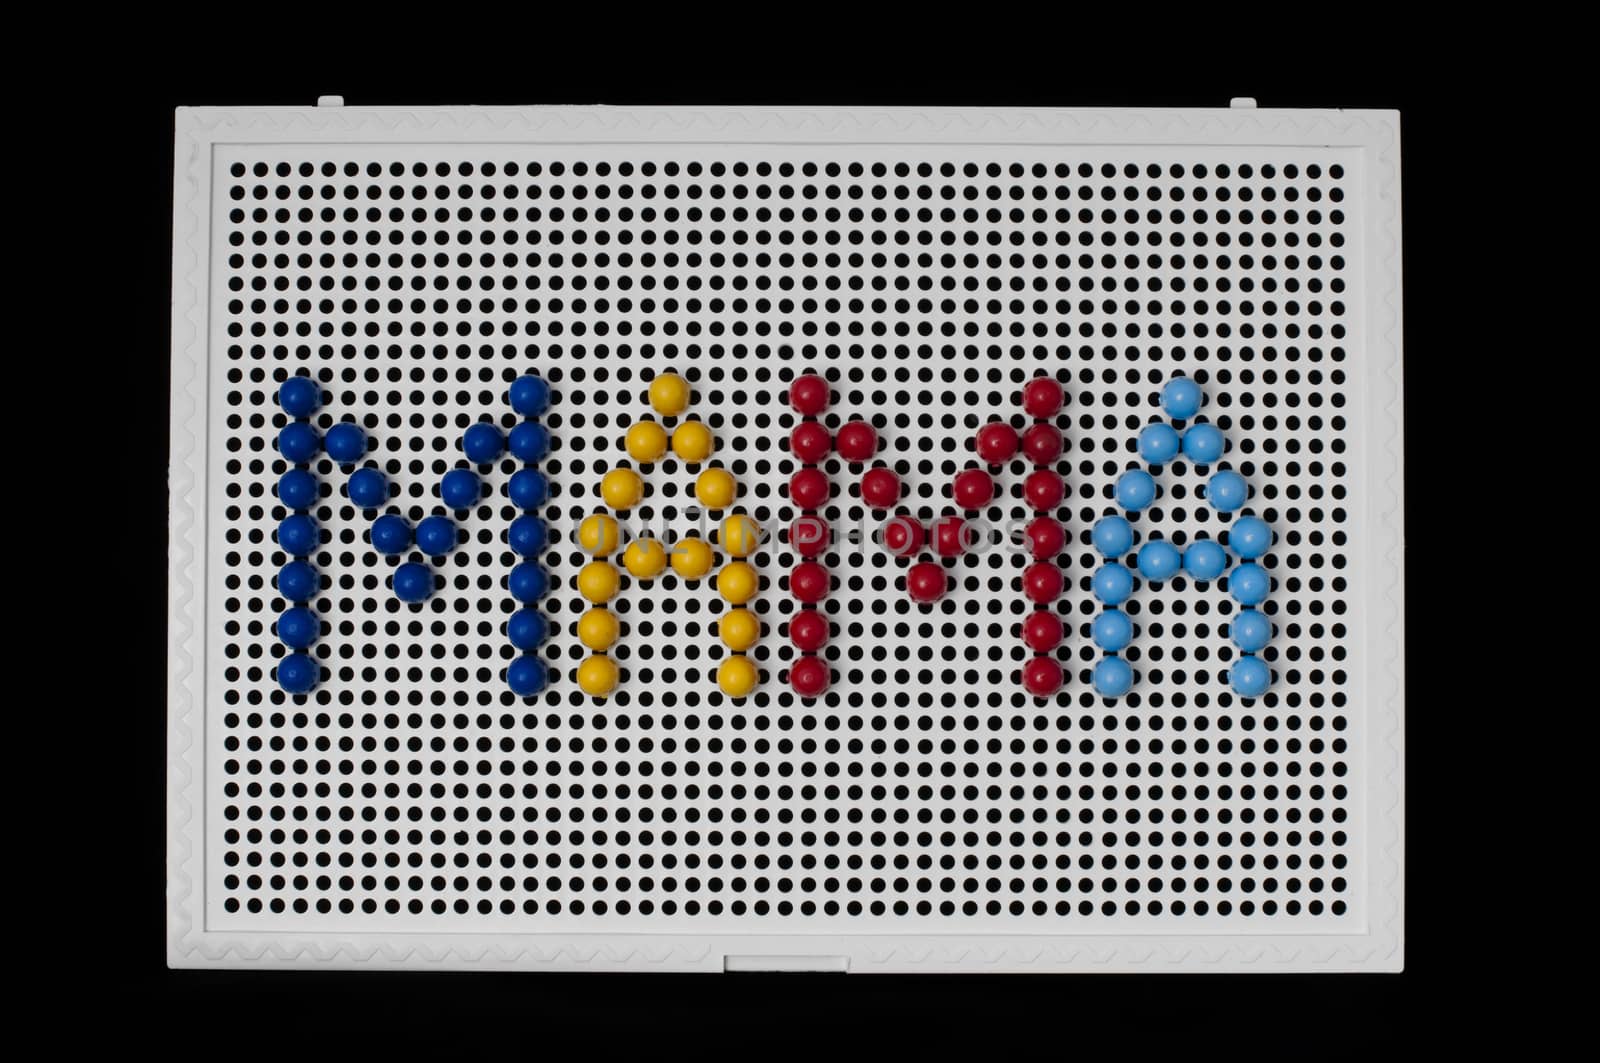 Text Mama on child mosaic. Colorful mosaic pieces